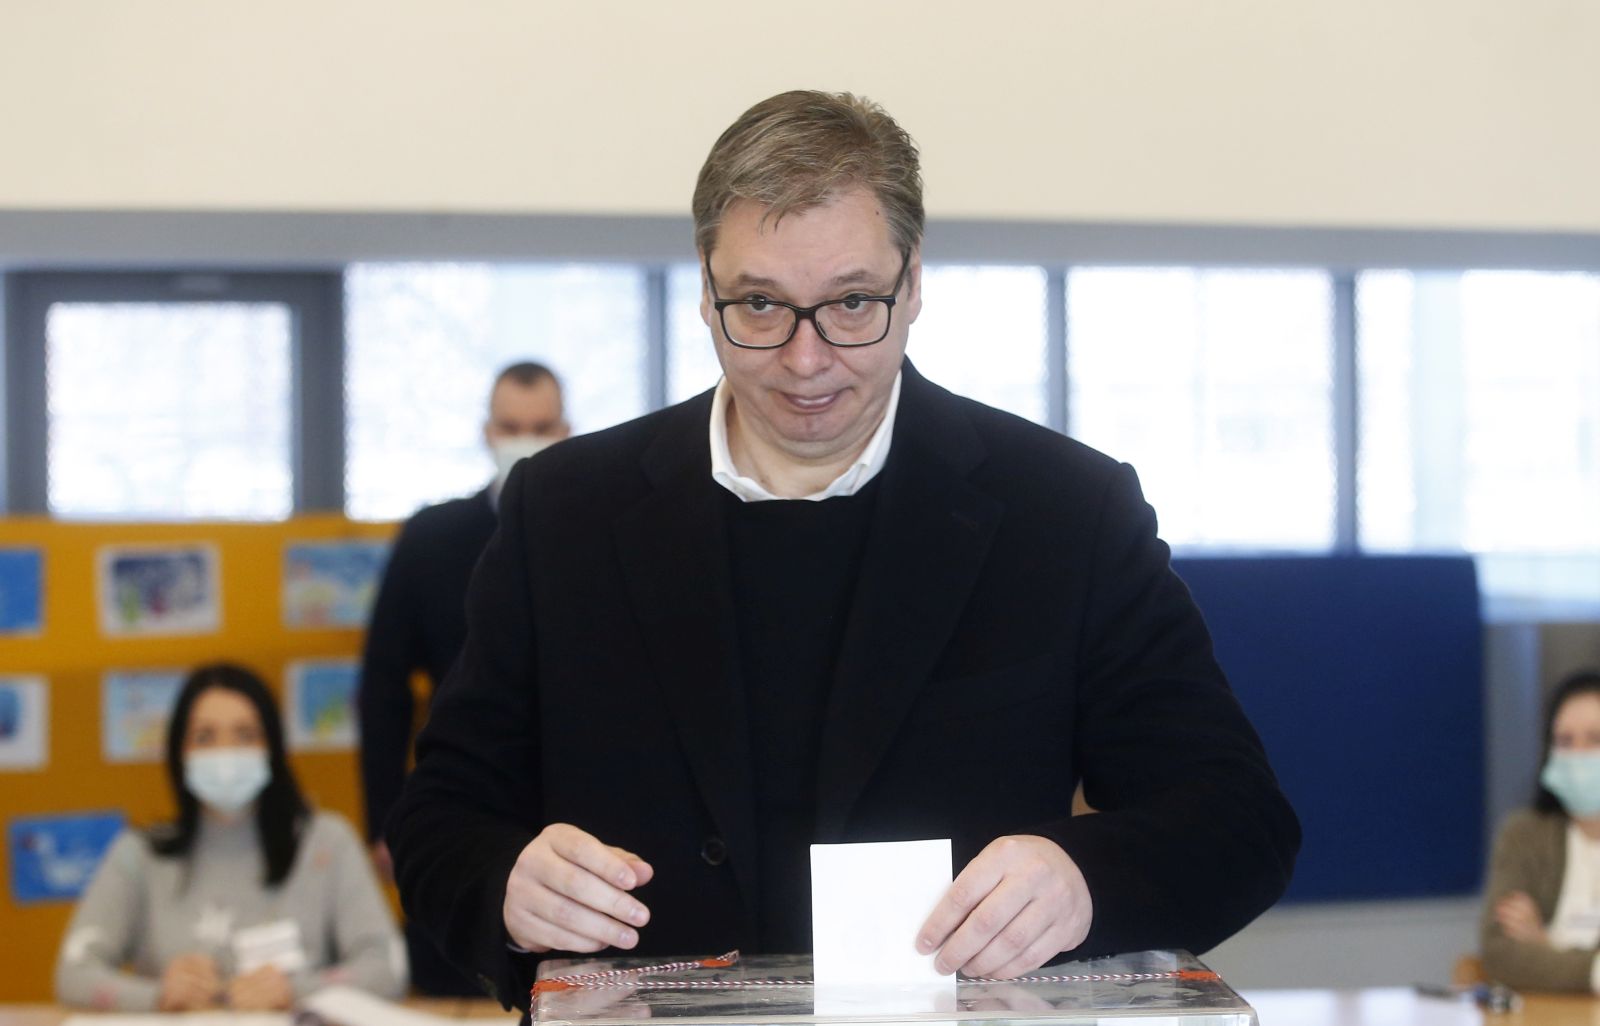 epa09688838 Serbian President Aleksandar Vucic casts a ballot during the referendum on constitutional changes in Belgrade, Serbia, 16 January 2022. Voters in Serbia decide on whether to change the constitution to create a more independent judiciary in line with the European Union standards, needed for Serbia's EU membership bid.  EPA/MARKO DJOKOVIC